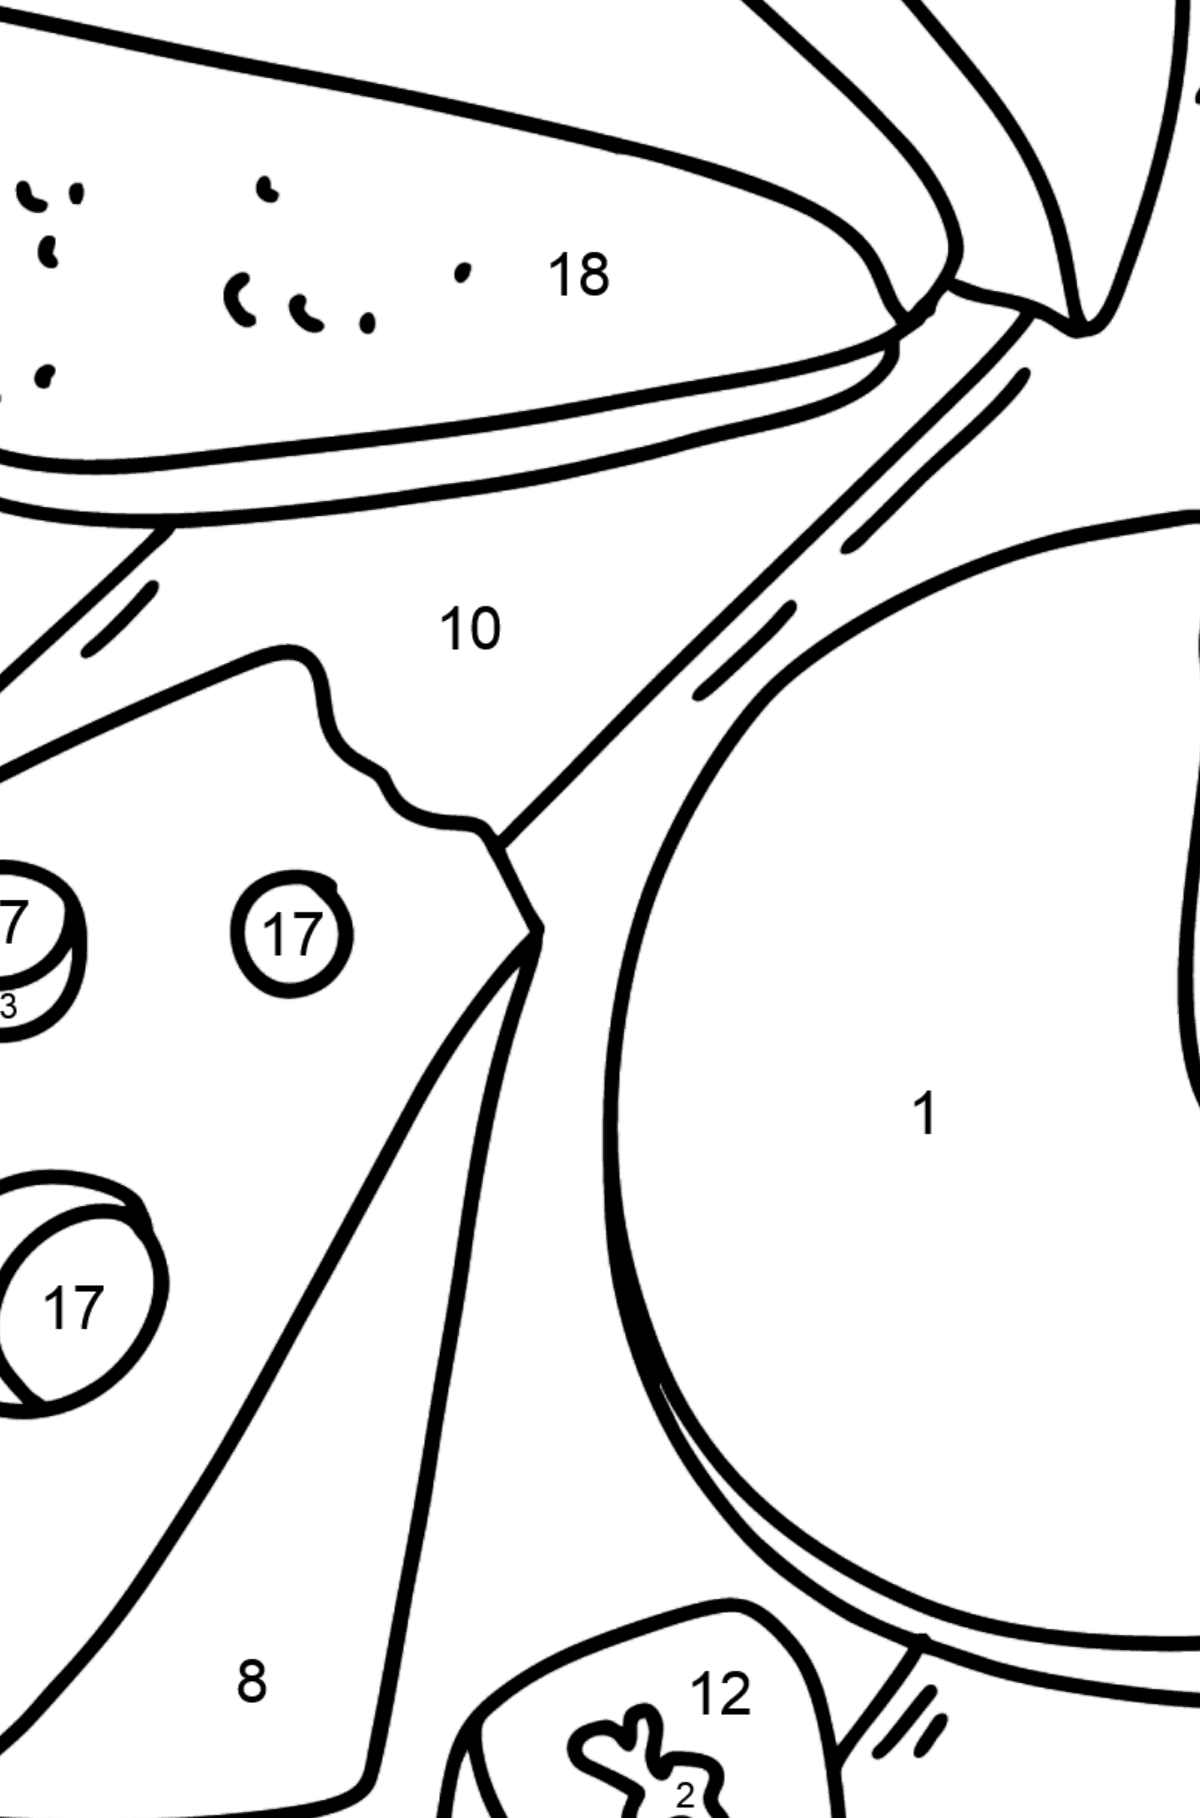 Cheese Plate coloring page - Coloring by Numbers for Kids